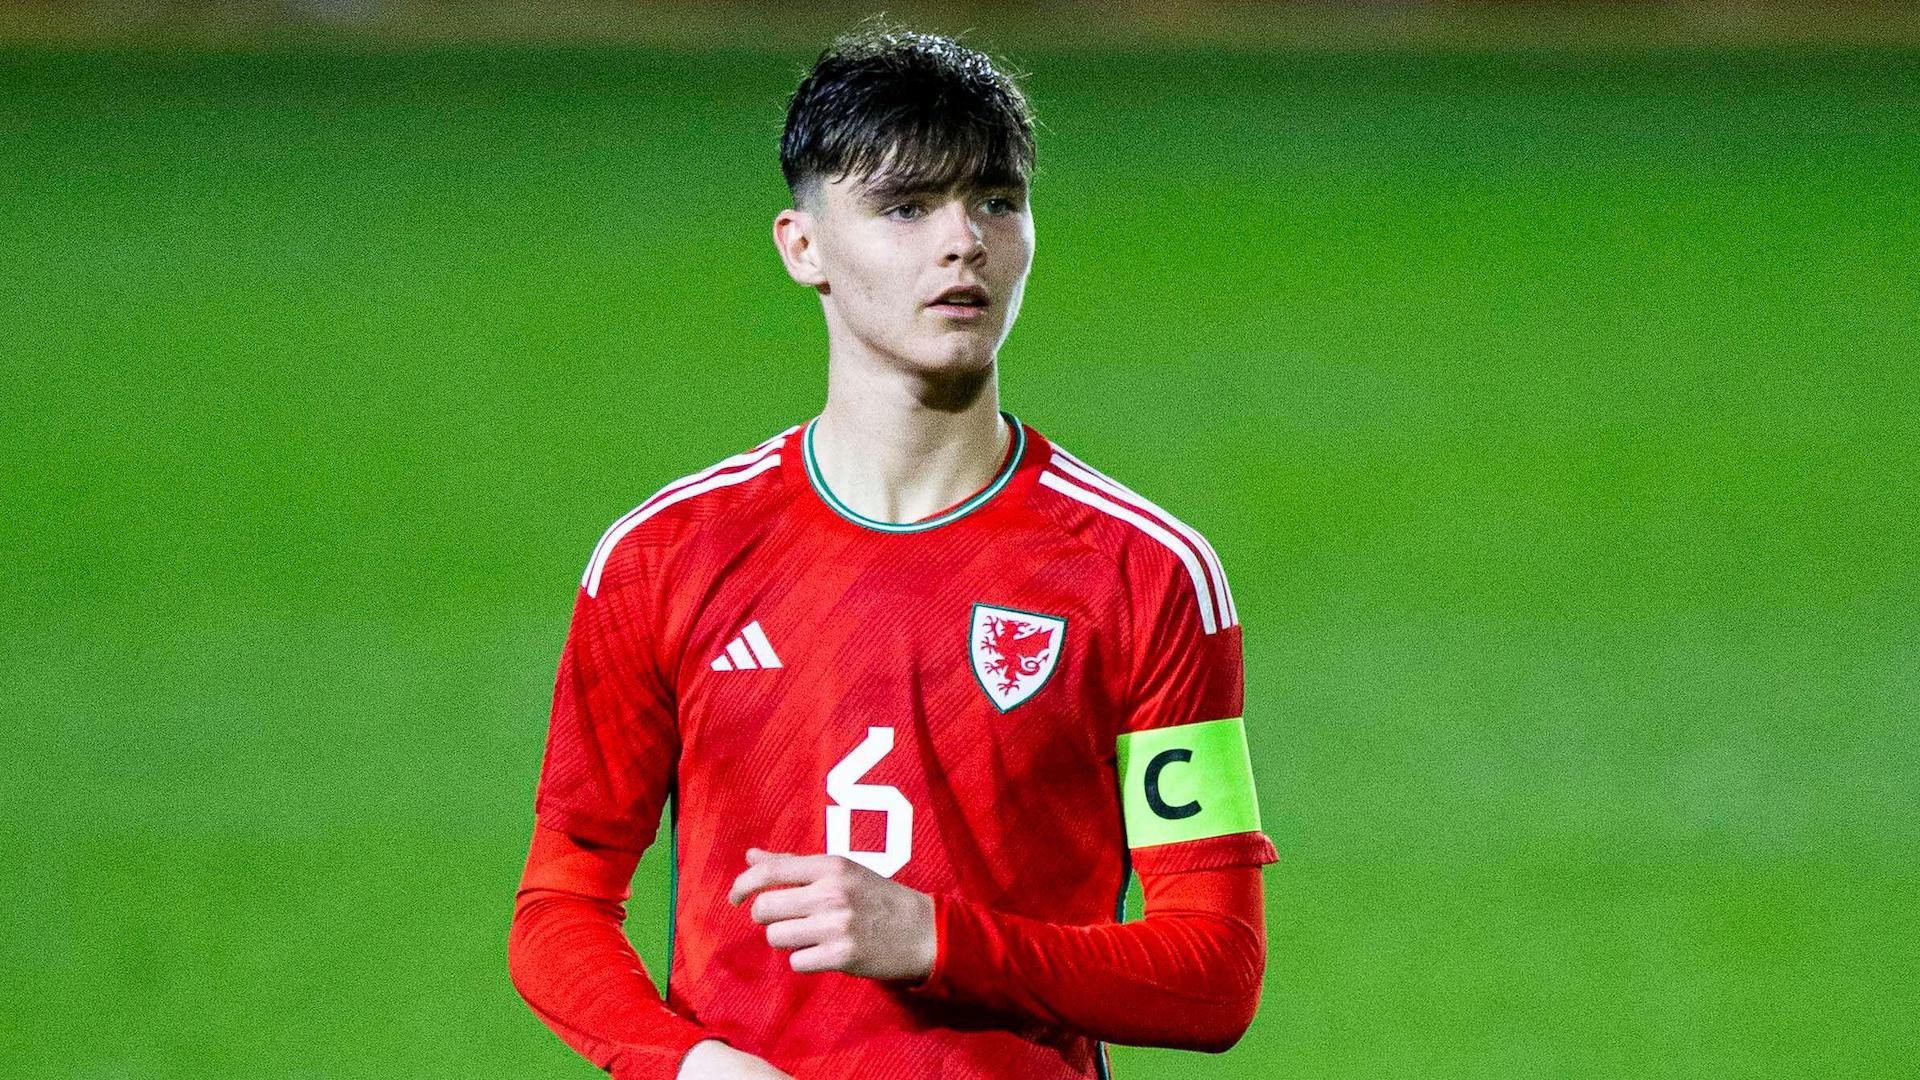 Leeds U21s midfielder Charlie Crew playing for Wales U17s and wearing the captain's armband. He's got a big sweepy fringe 'cos he's young